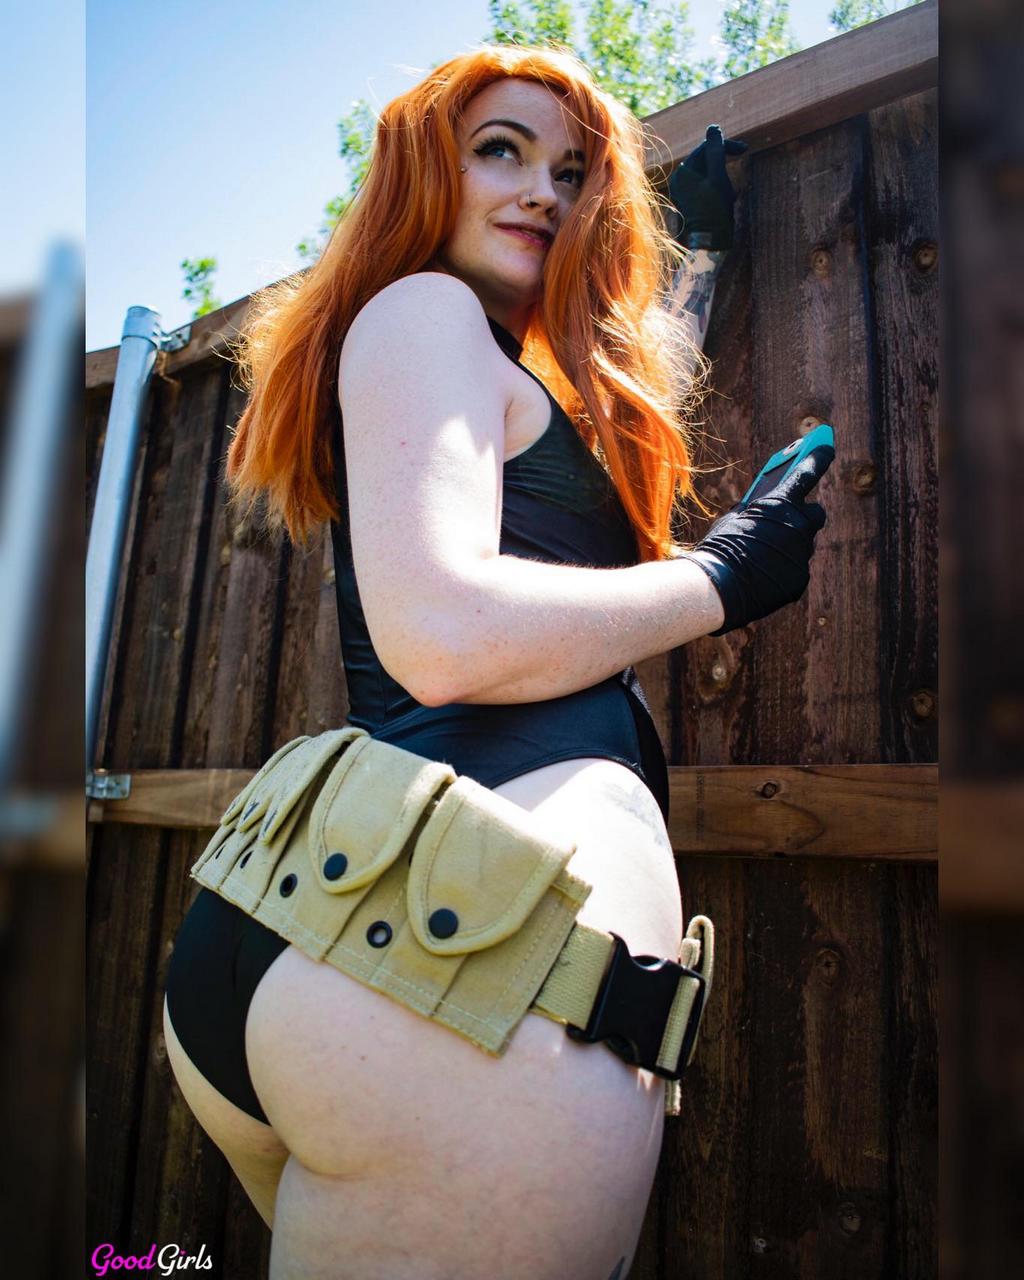 Novocainecosplay As Kim Possible For Goodgirlgallery Check Us Out On Of And Inst